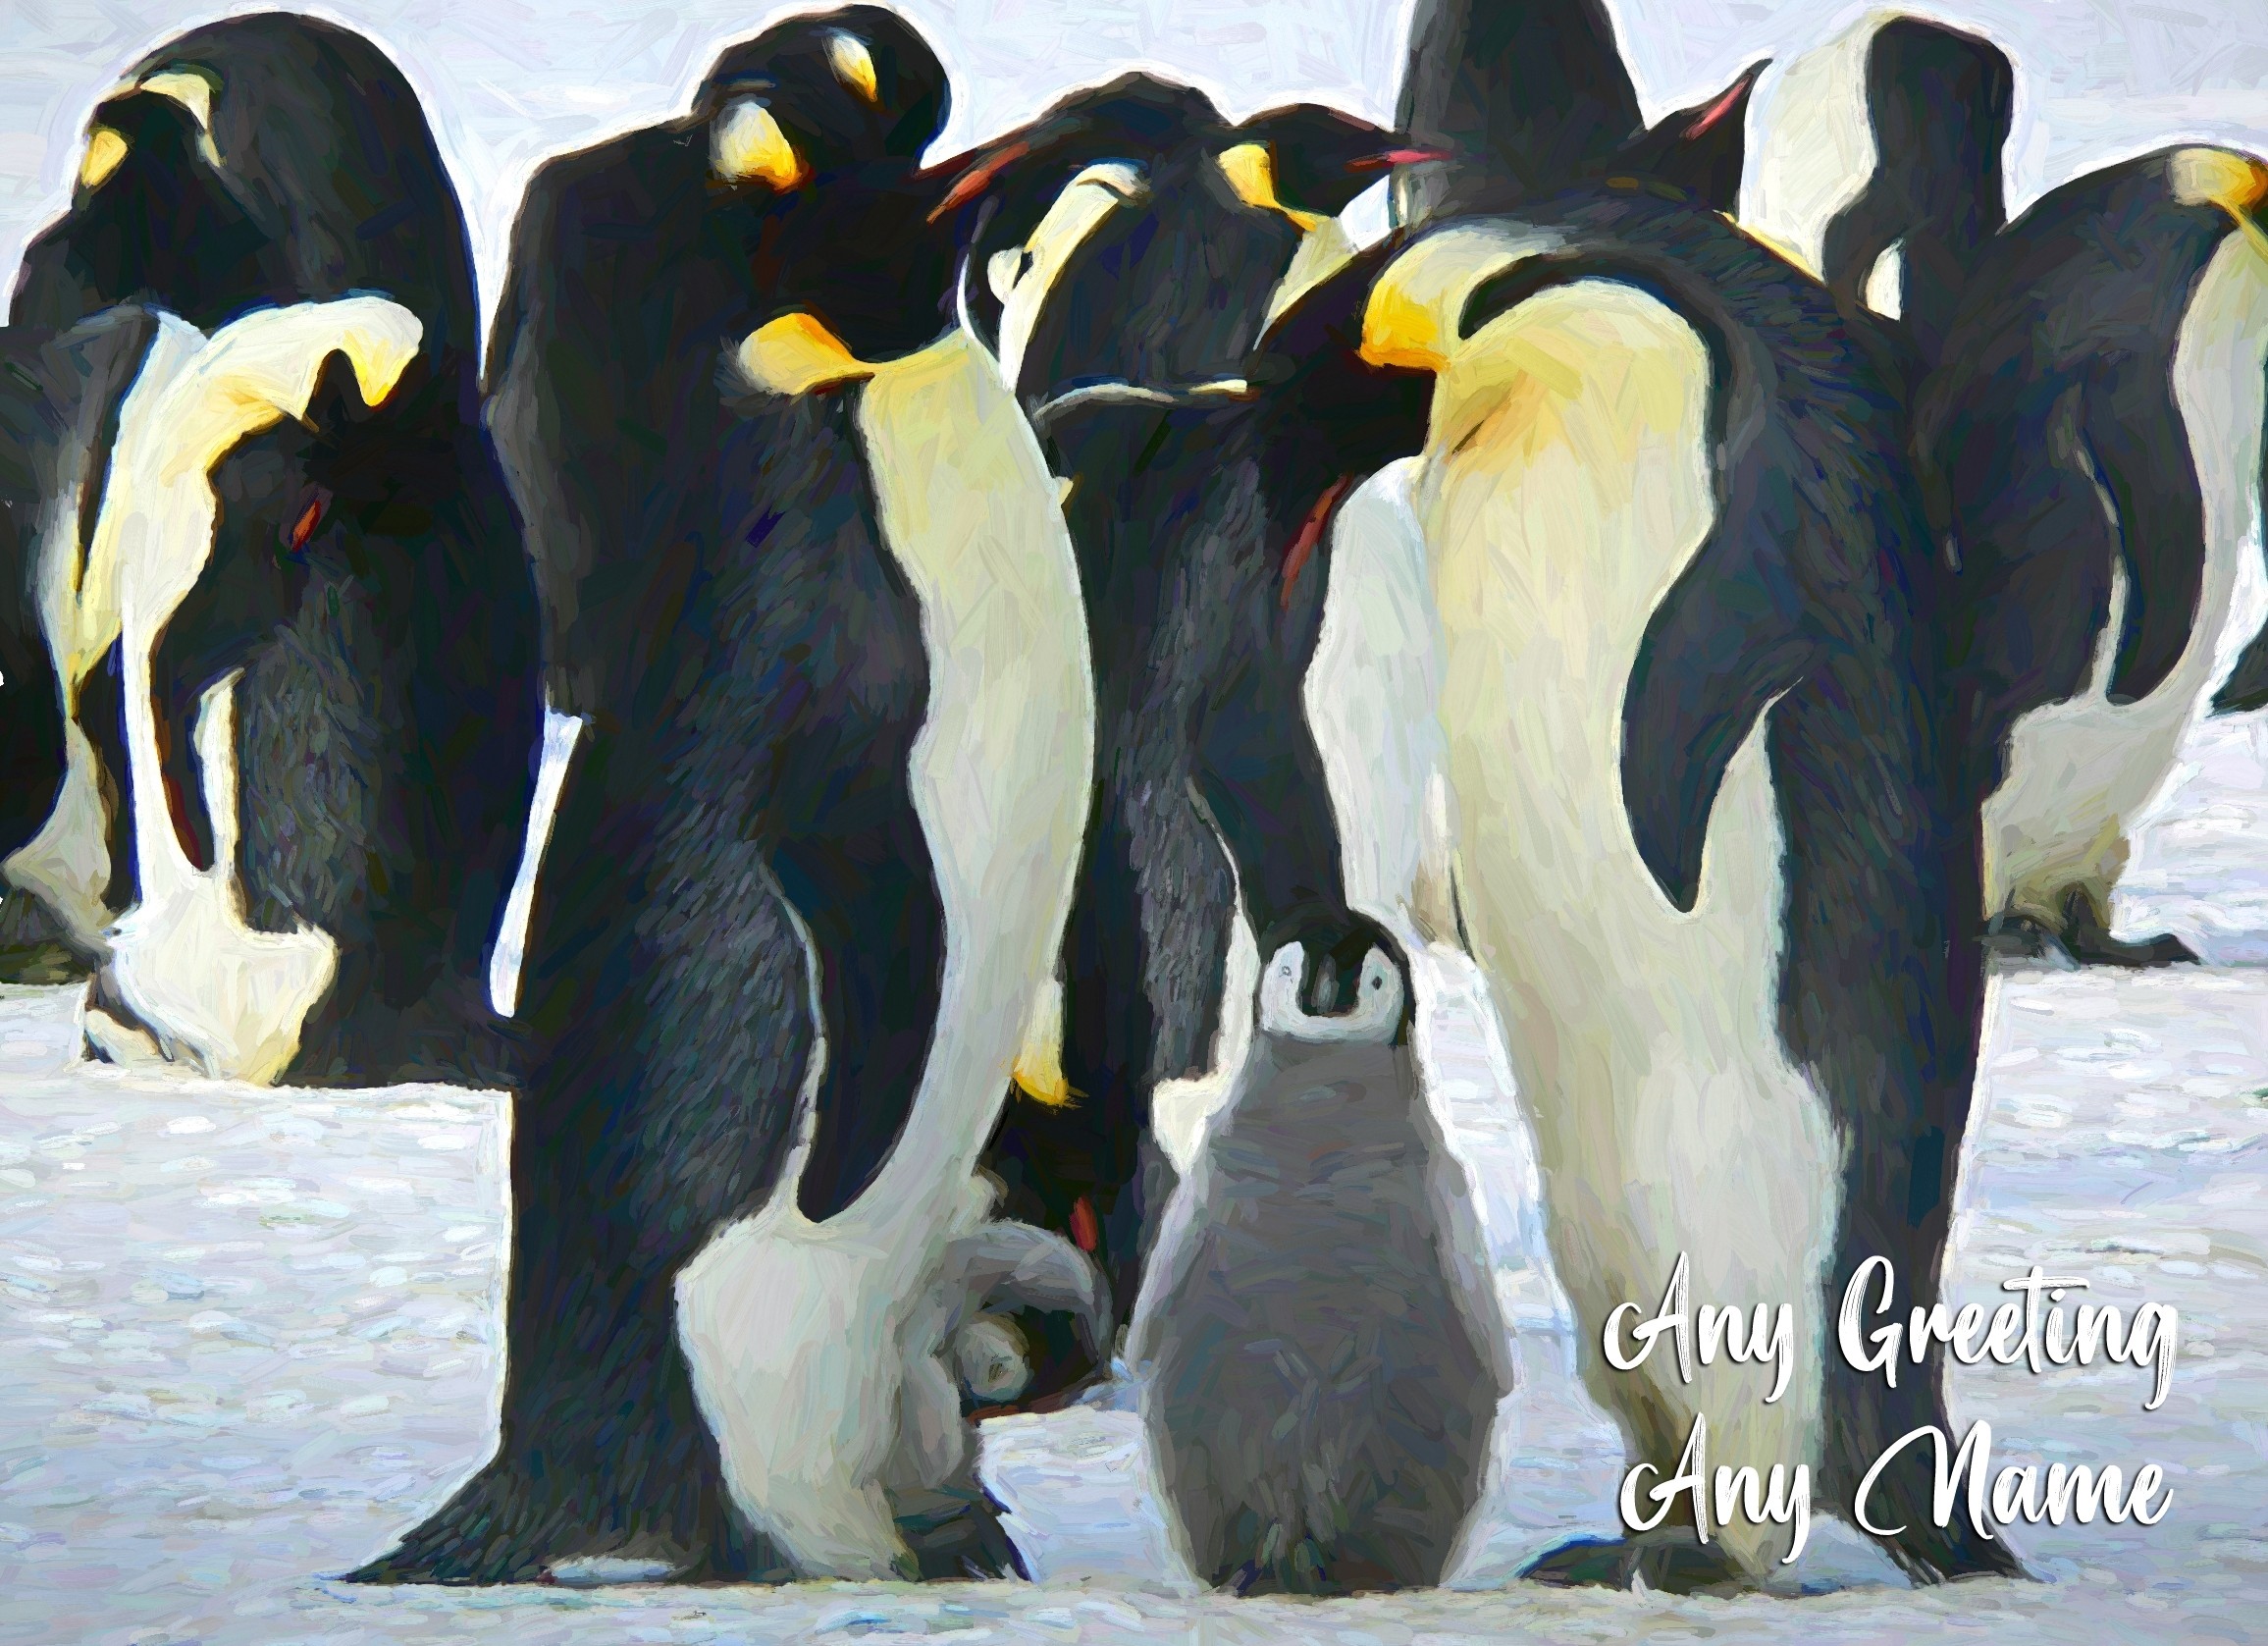 Personalised Penguin Art Greeting Card (Birthday, Christmas, Any Occasion)